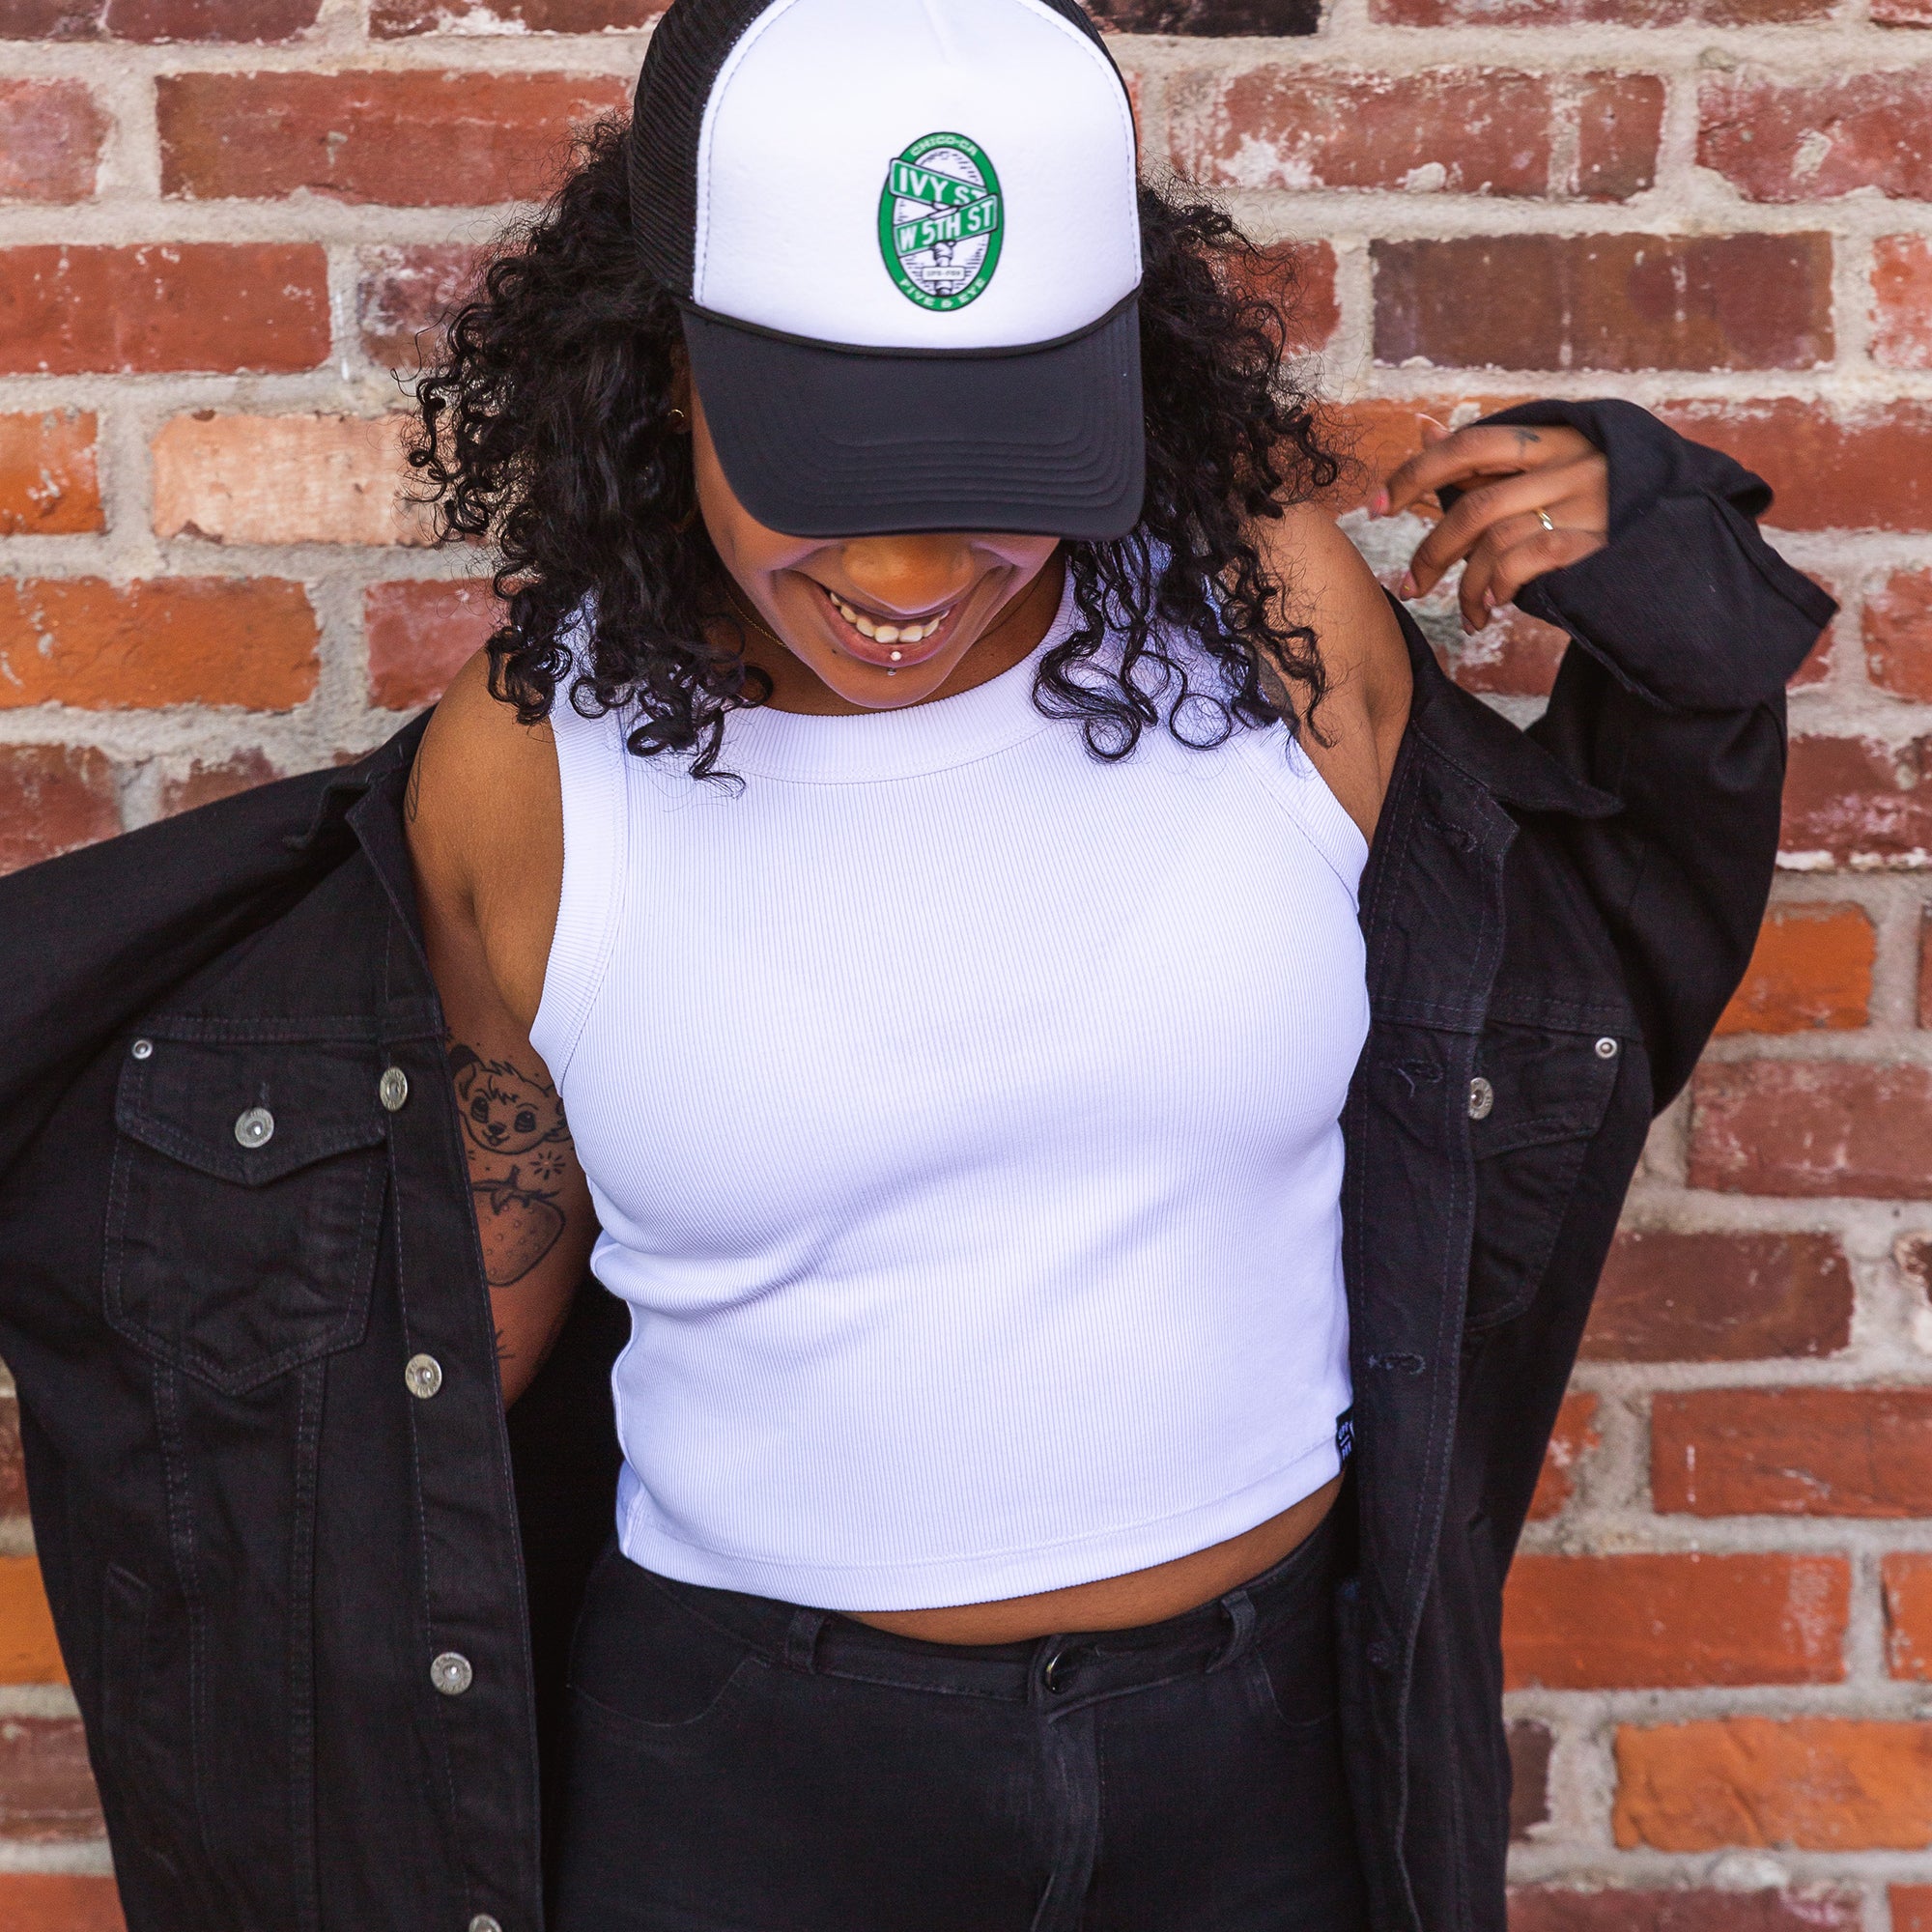 women standing in front of a brick wall wearing a Black Foam Trucker Five and Eye hat from Upper Park Clothing